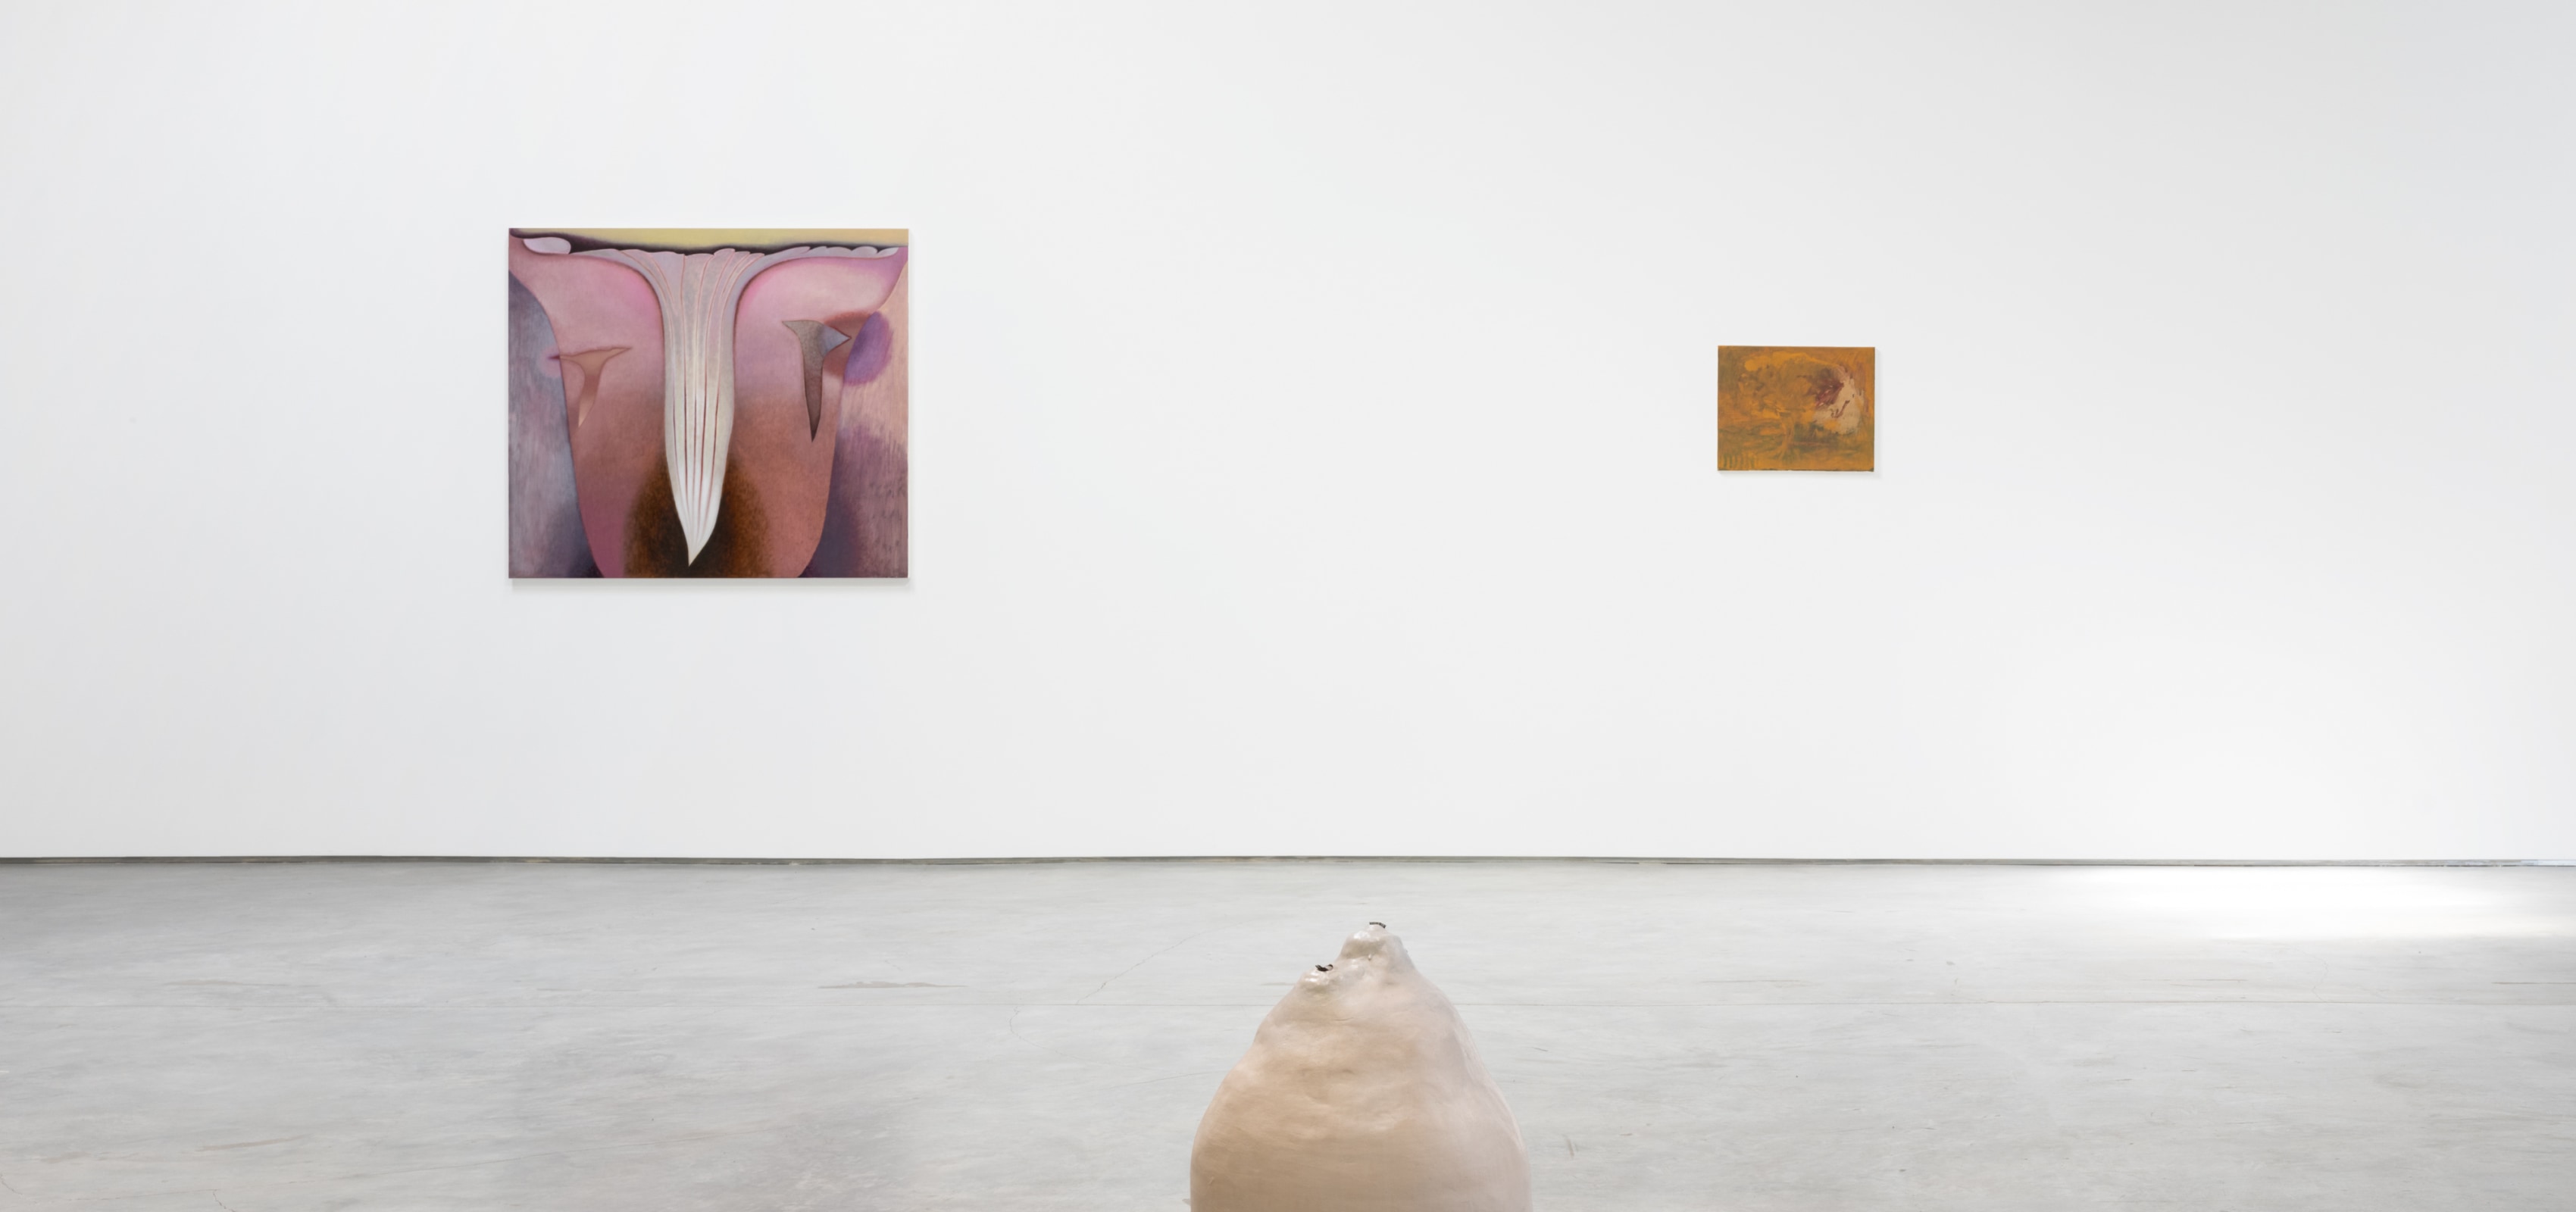 Installation view of “There is Feeling”